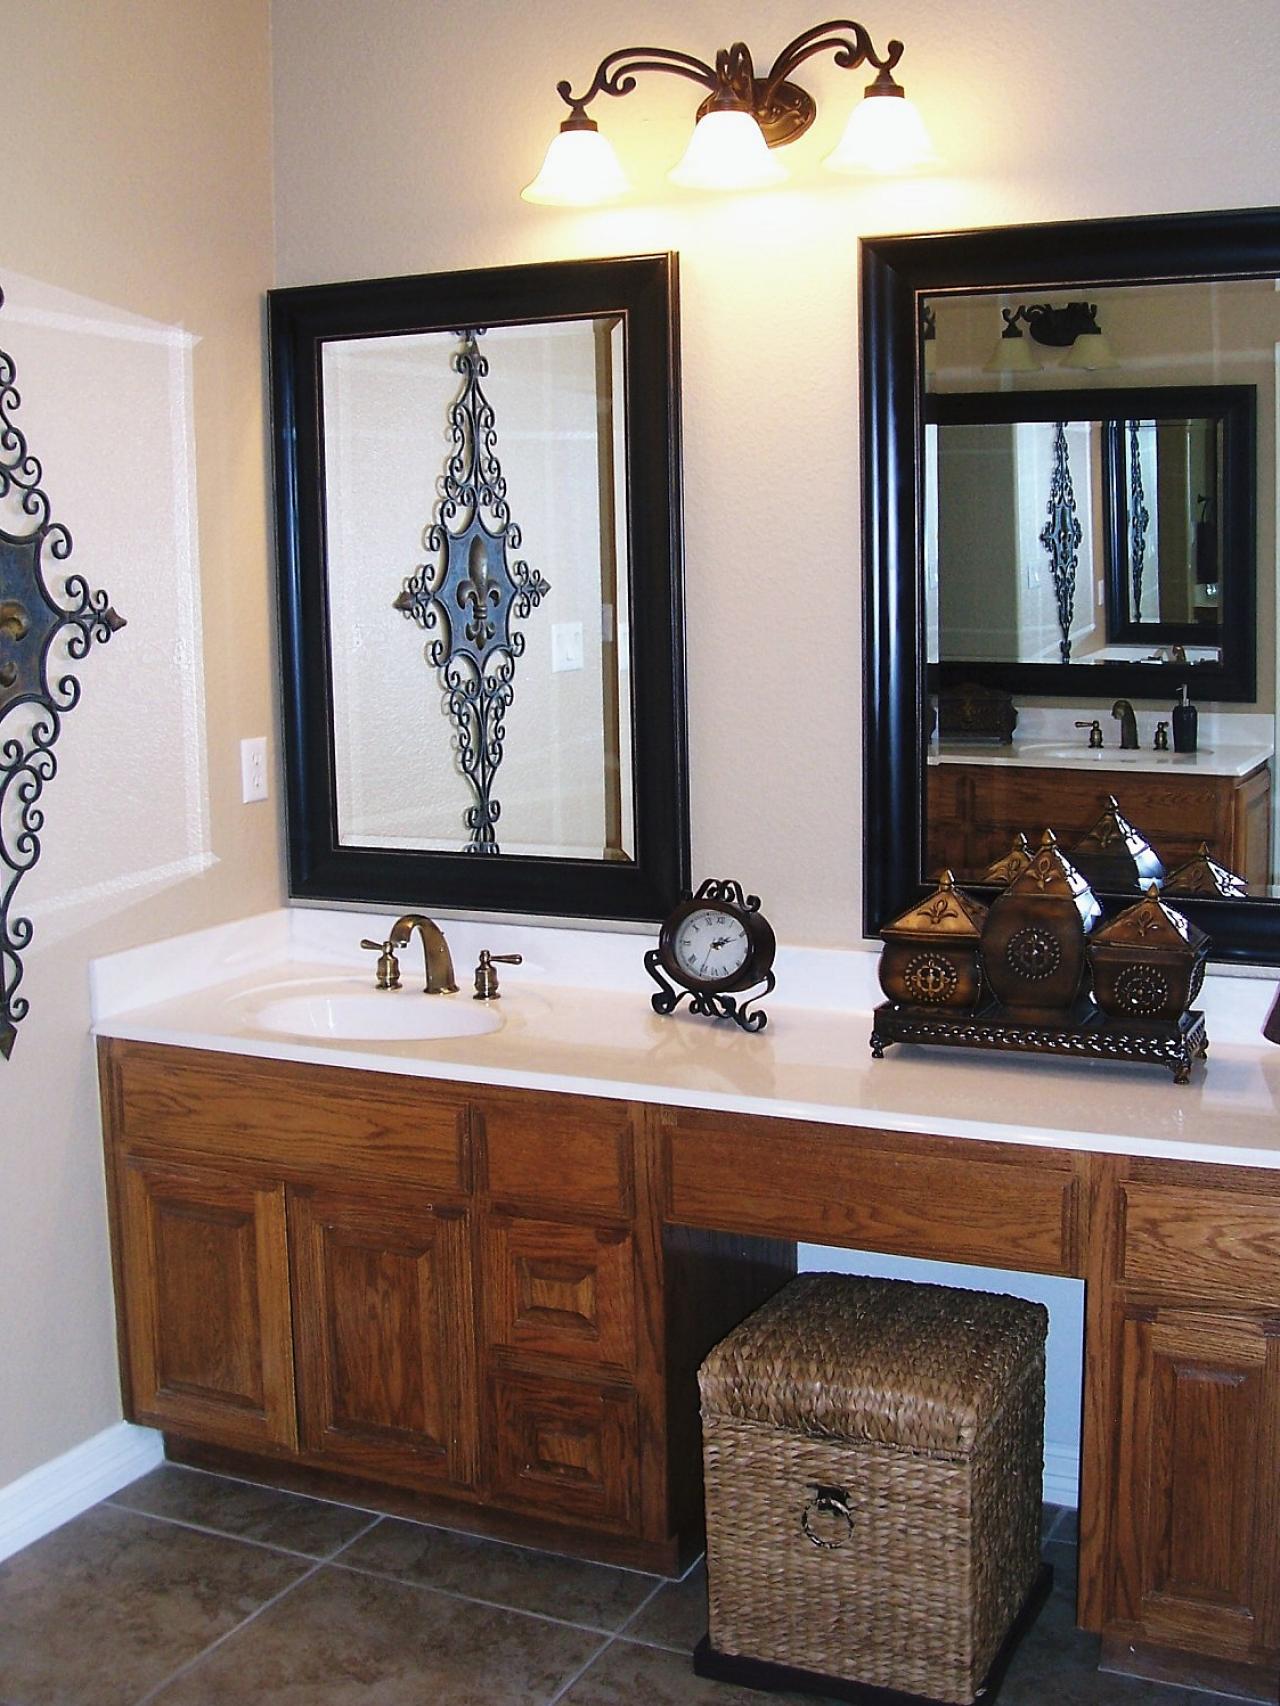 Design With Framed Bathroom Design With Two Black Framed Bathroom Vanity Mirrors Marble Floor And Built In Washbasins Wooden Cabinets Bathroom Stunning Bathroom Vanity Mirrors For Elegant Homes